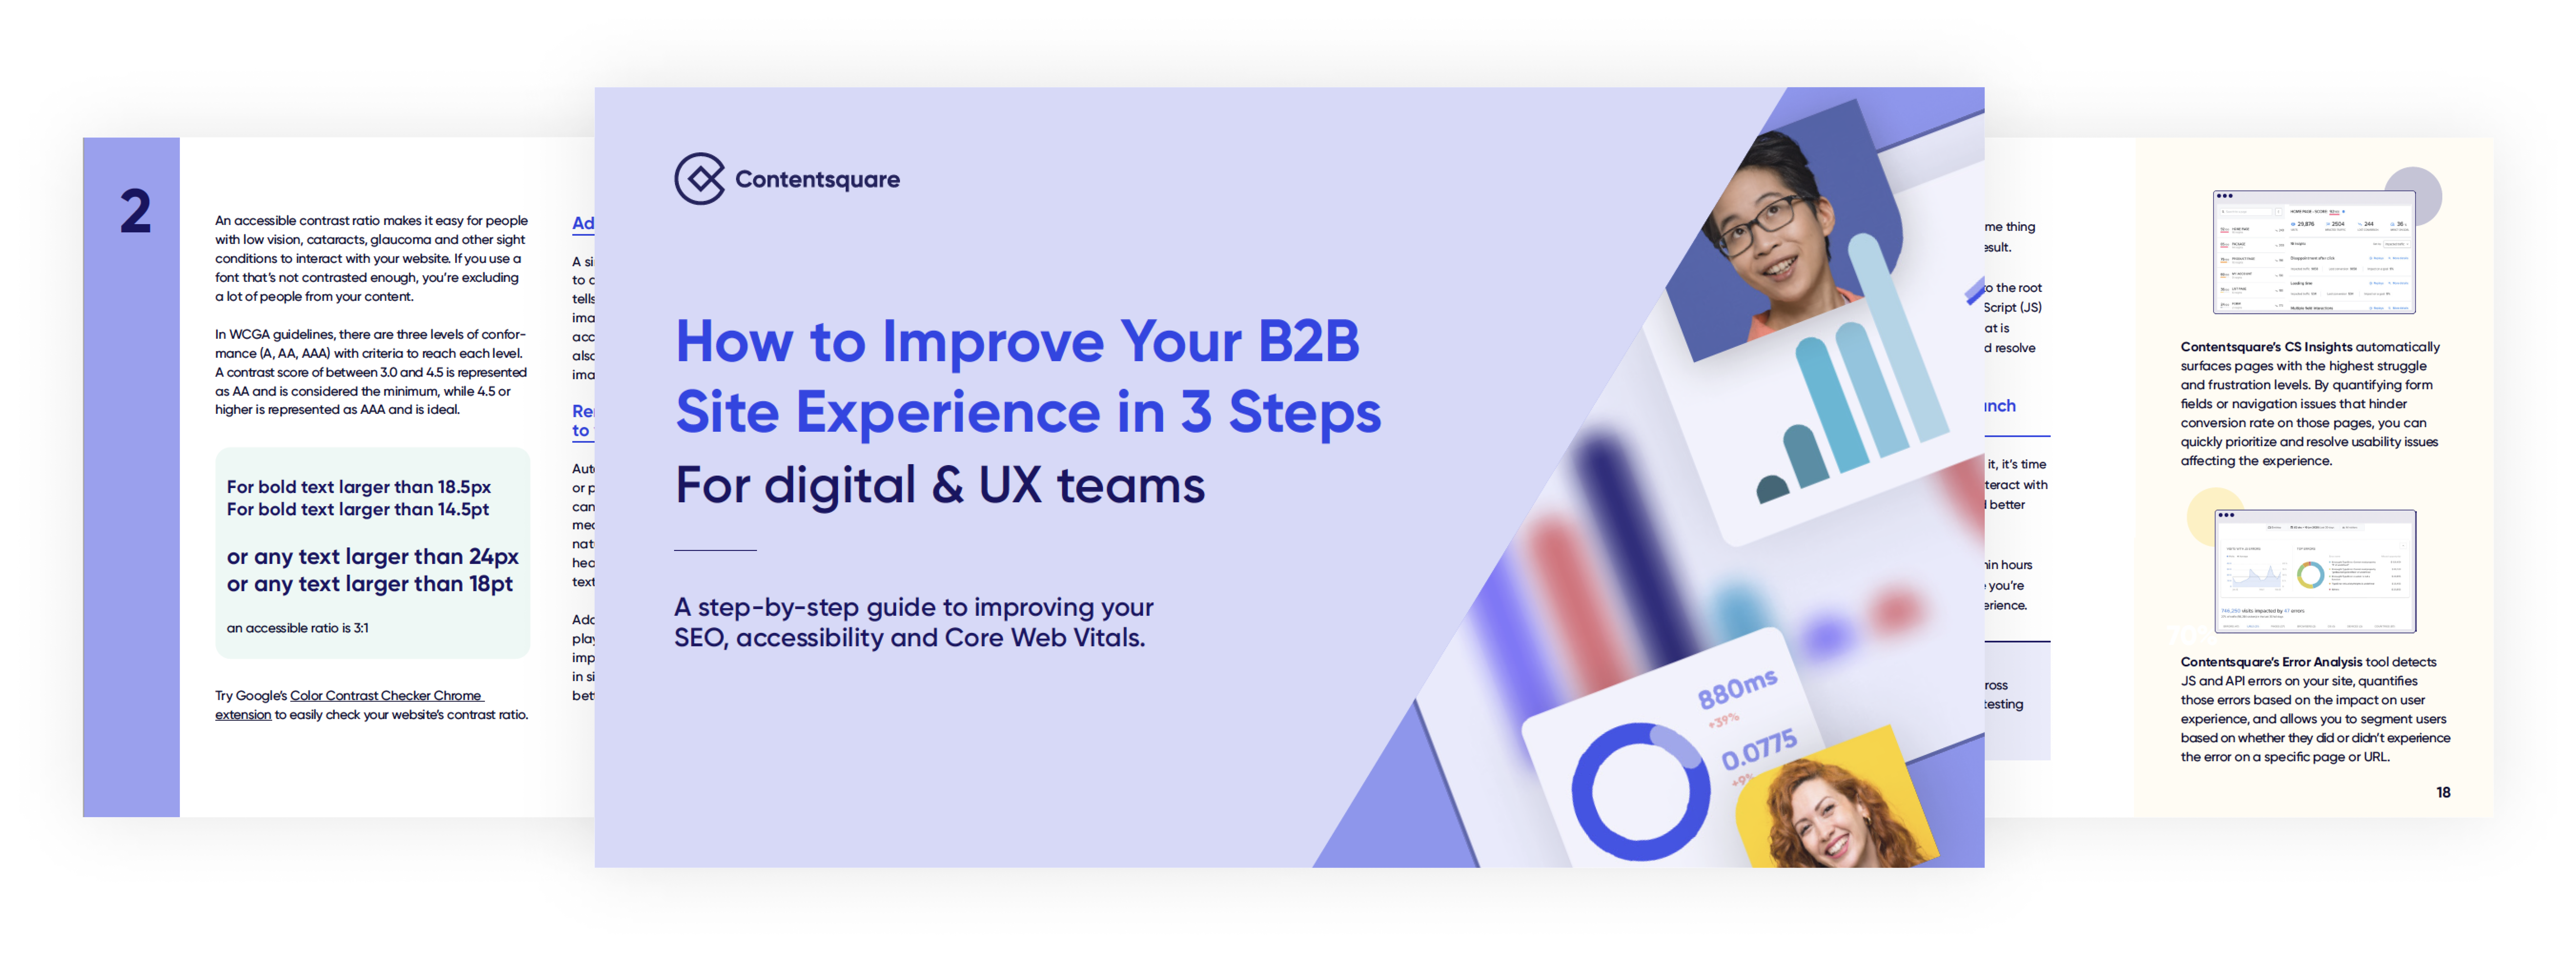 How to Improve your B2B site - Guide Mockup-1